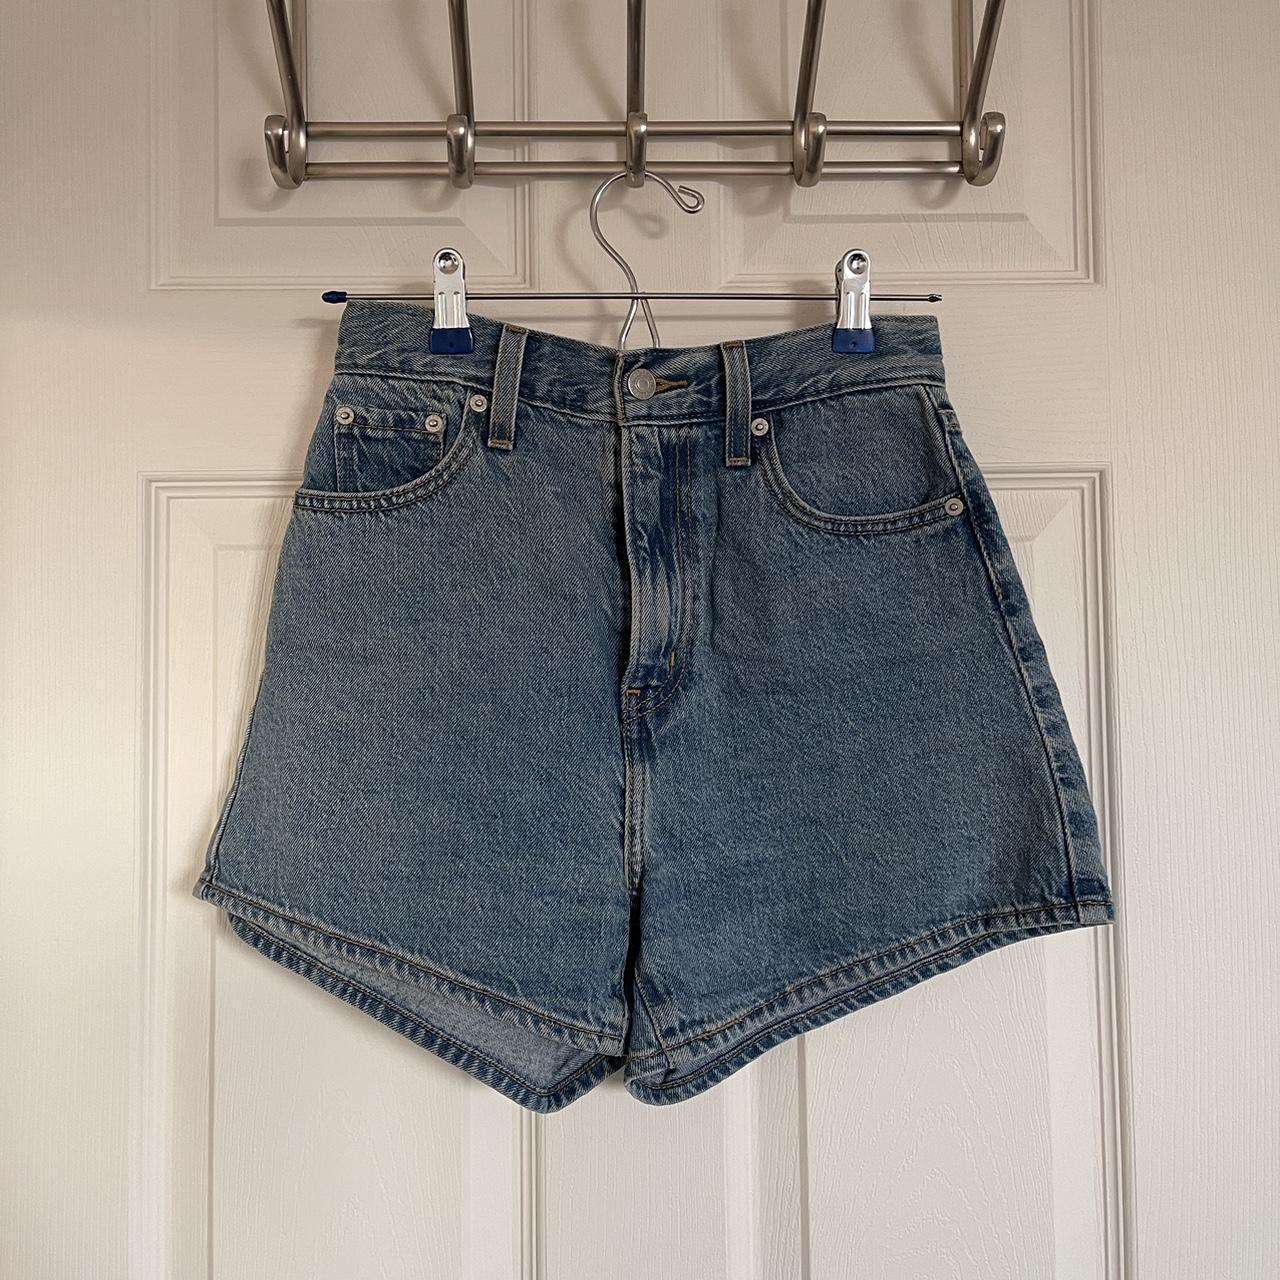 Levi High Loose Shorts Light wash Relaxed 90s... - Depop